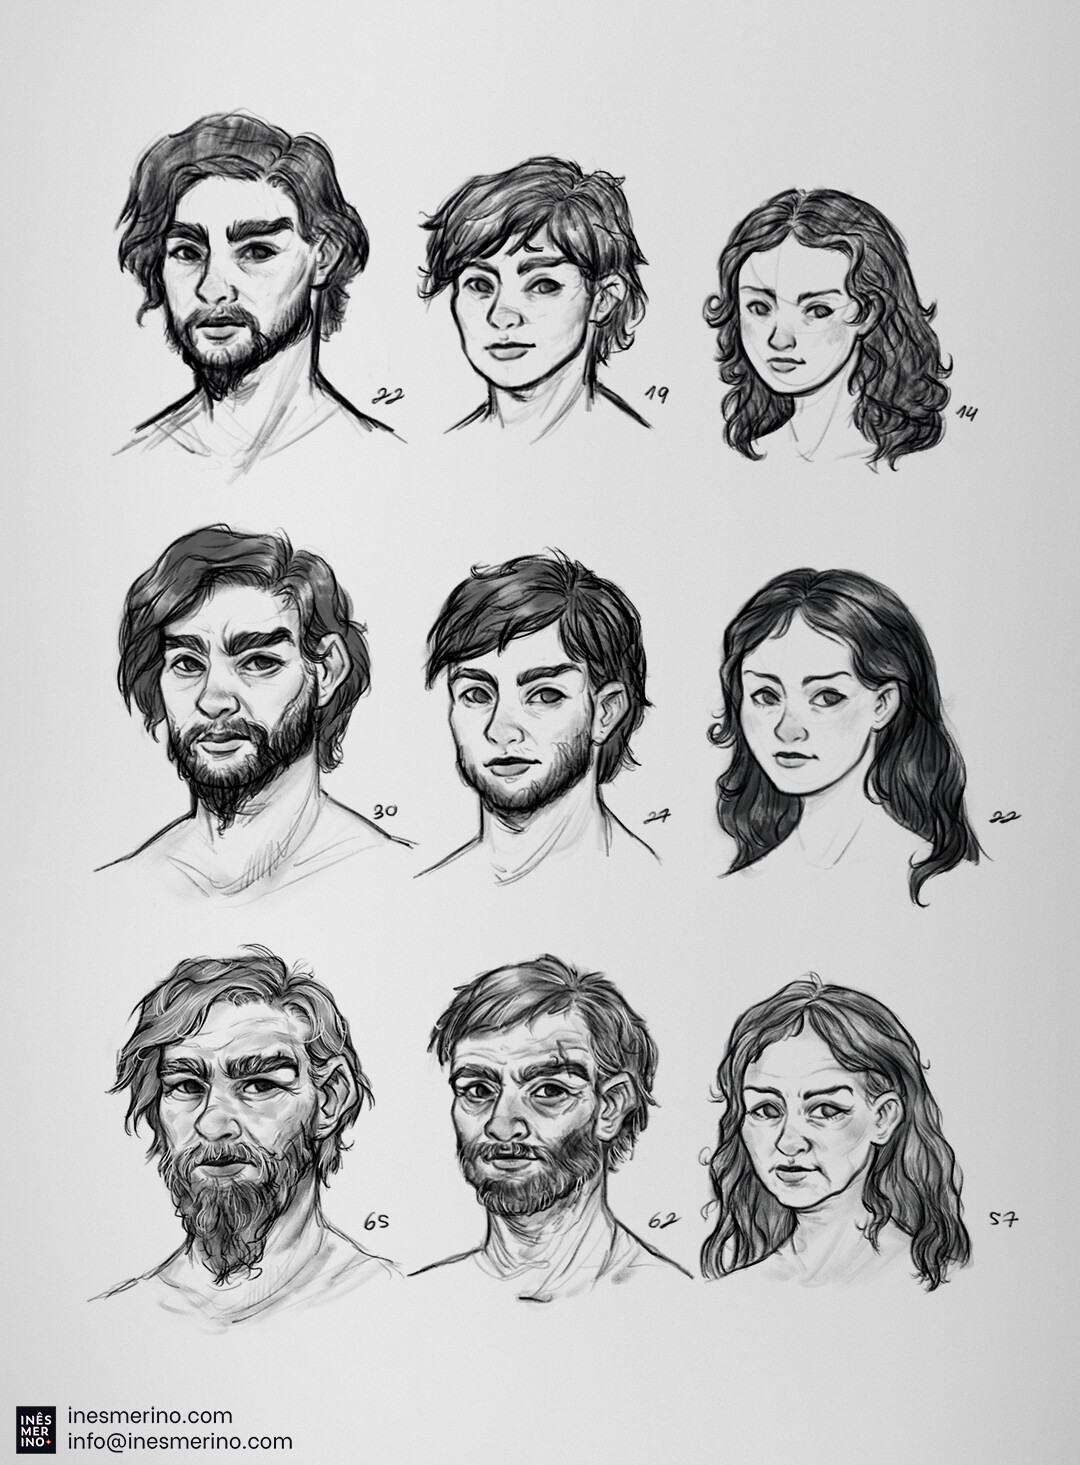 Aging exploration done once the character's portraits were established